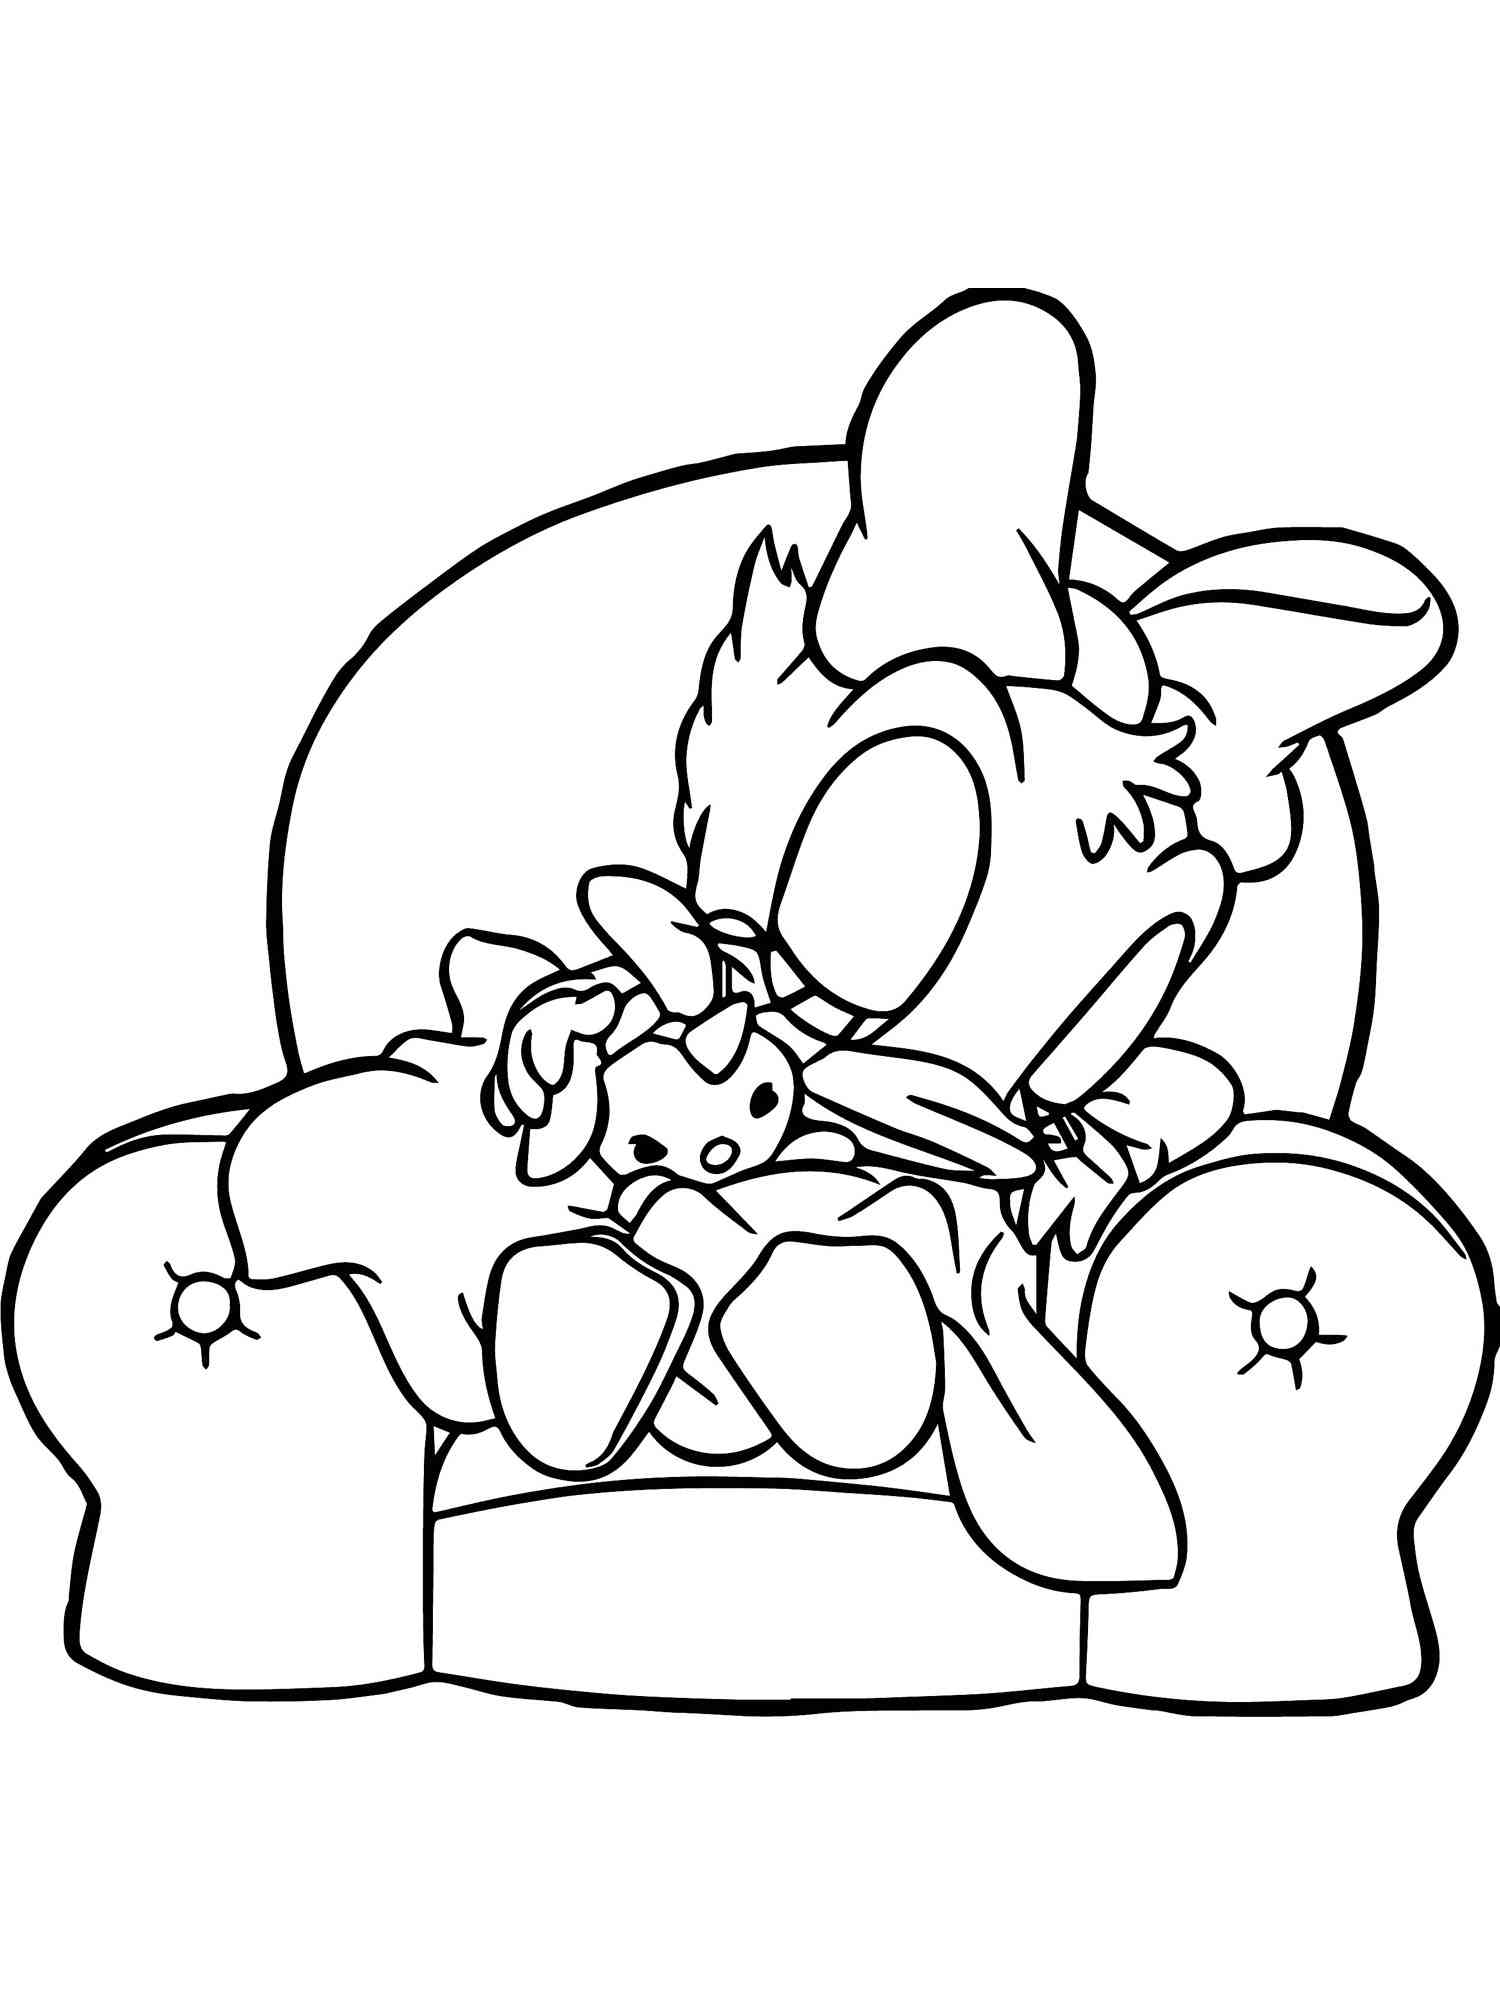 Daisy Duck 27 coloring page